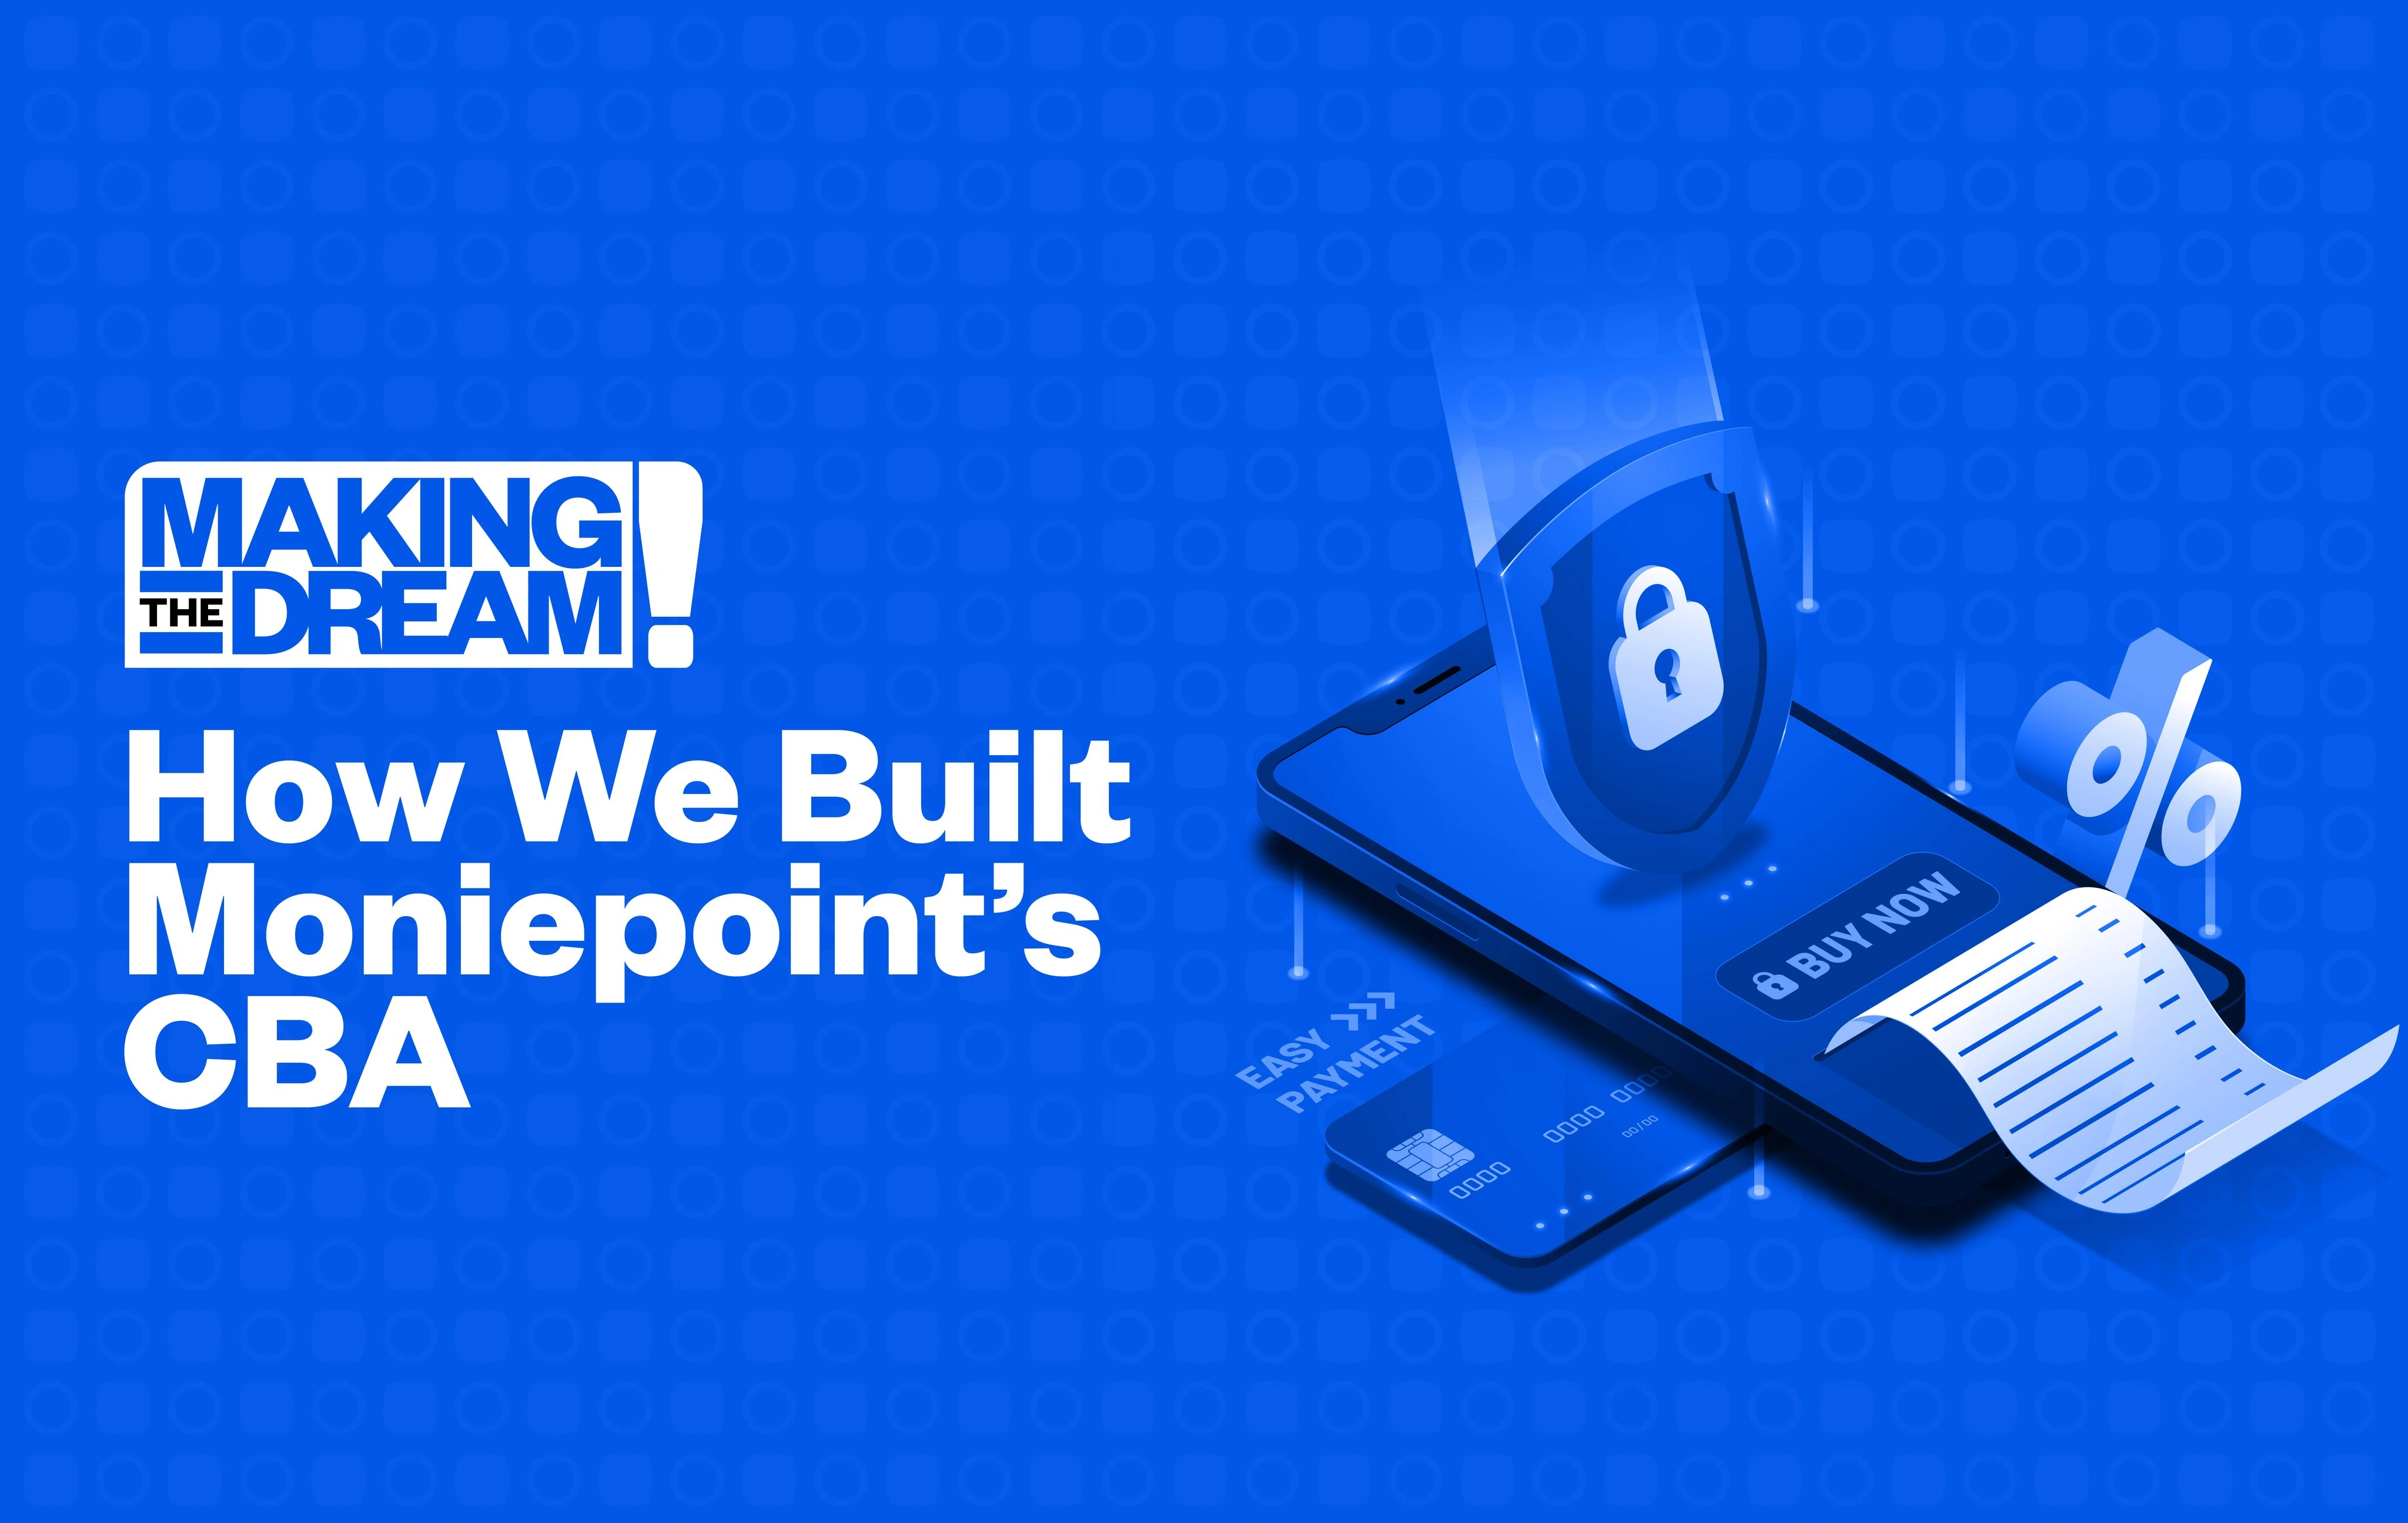 Making the dream: How we built Moniepoint’s CBA.